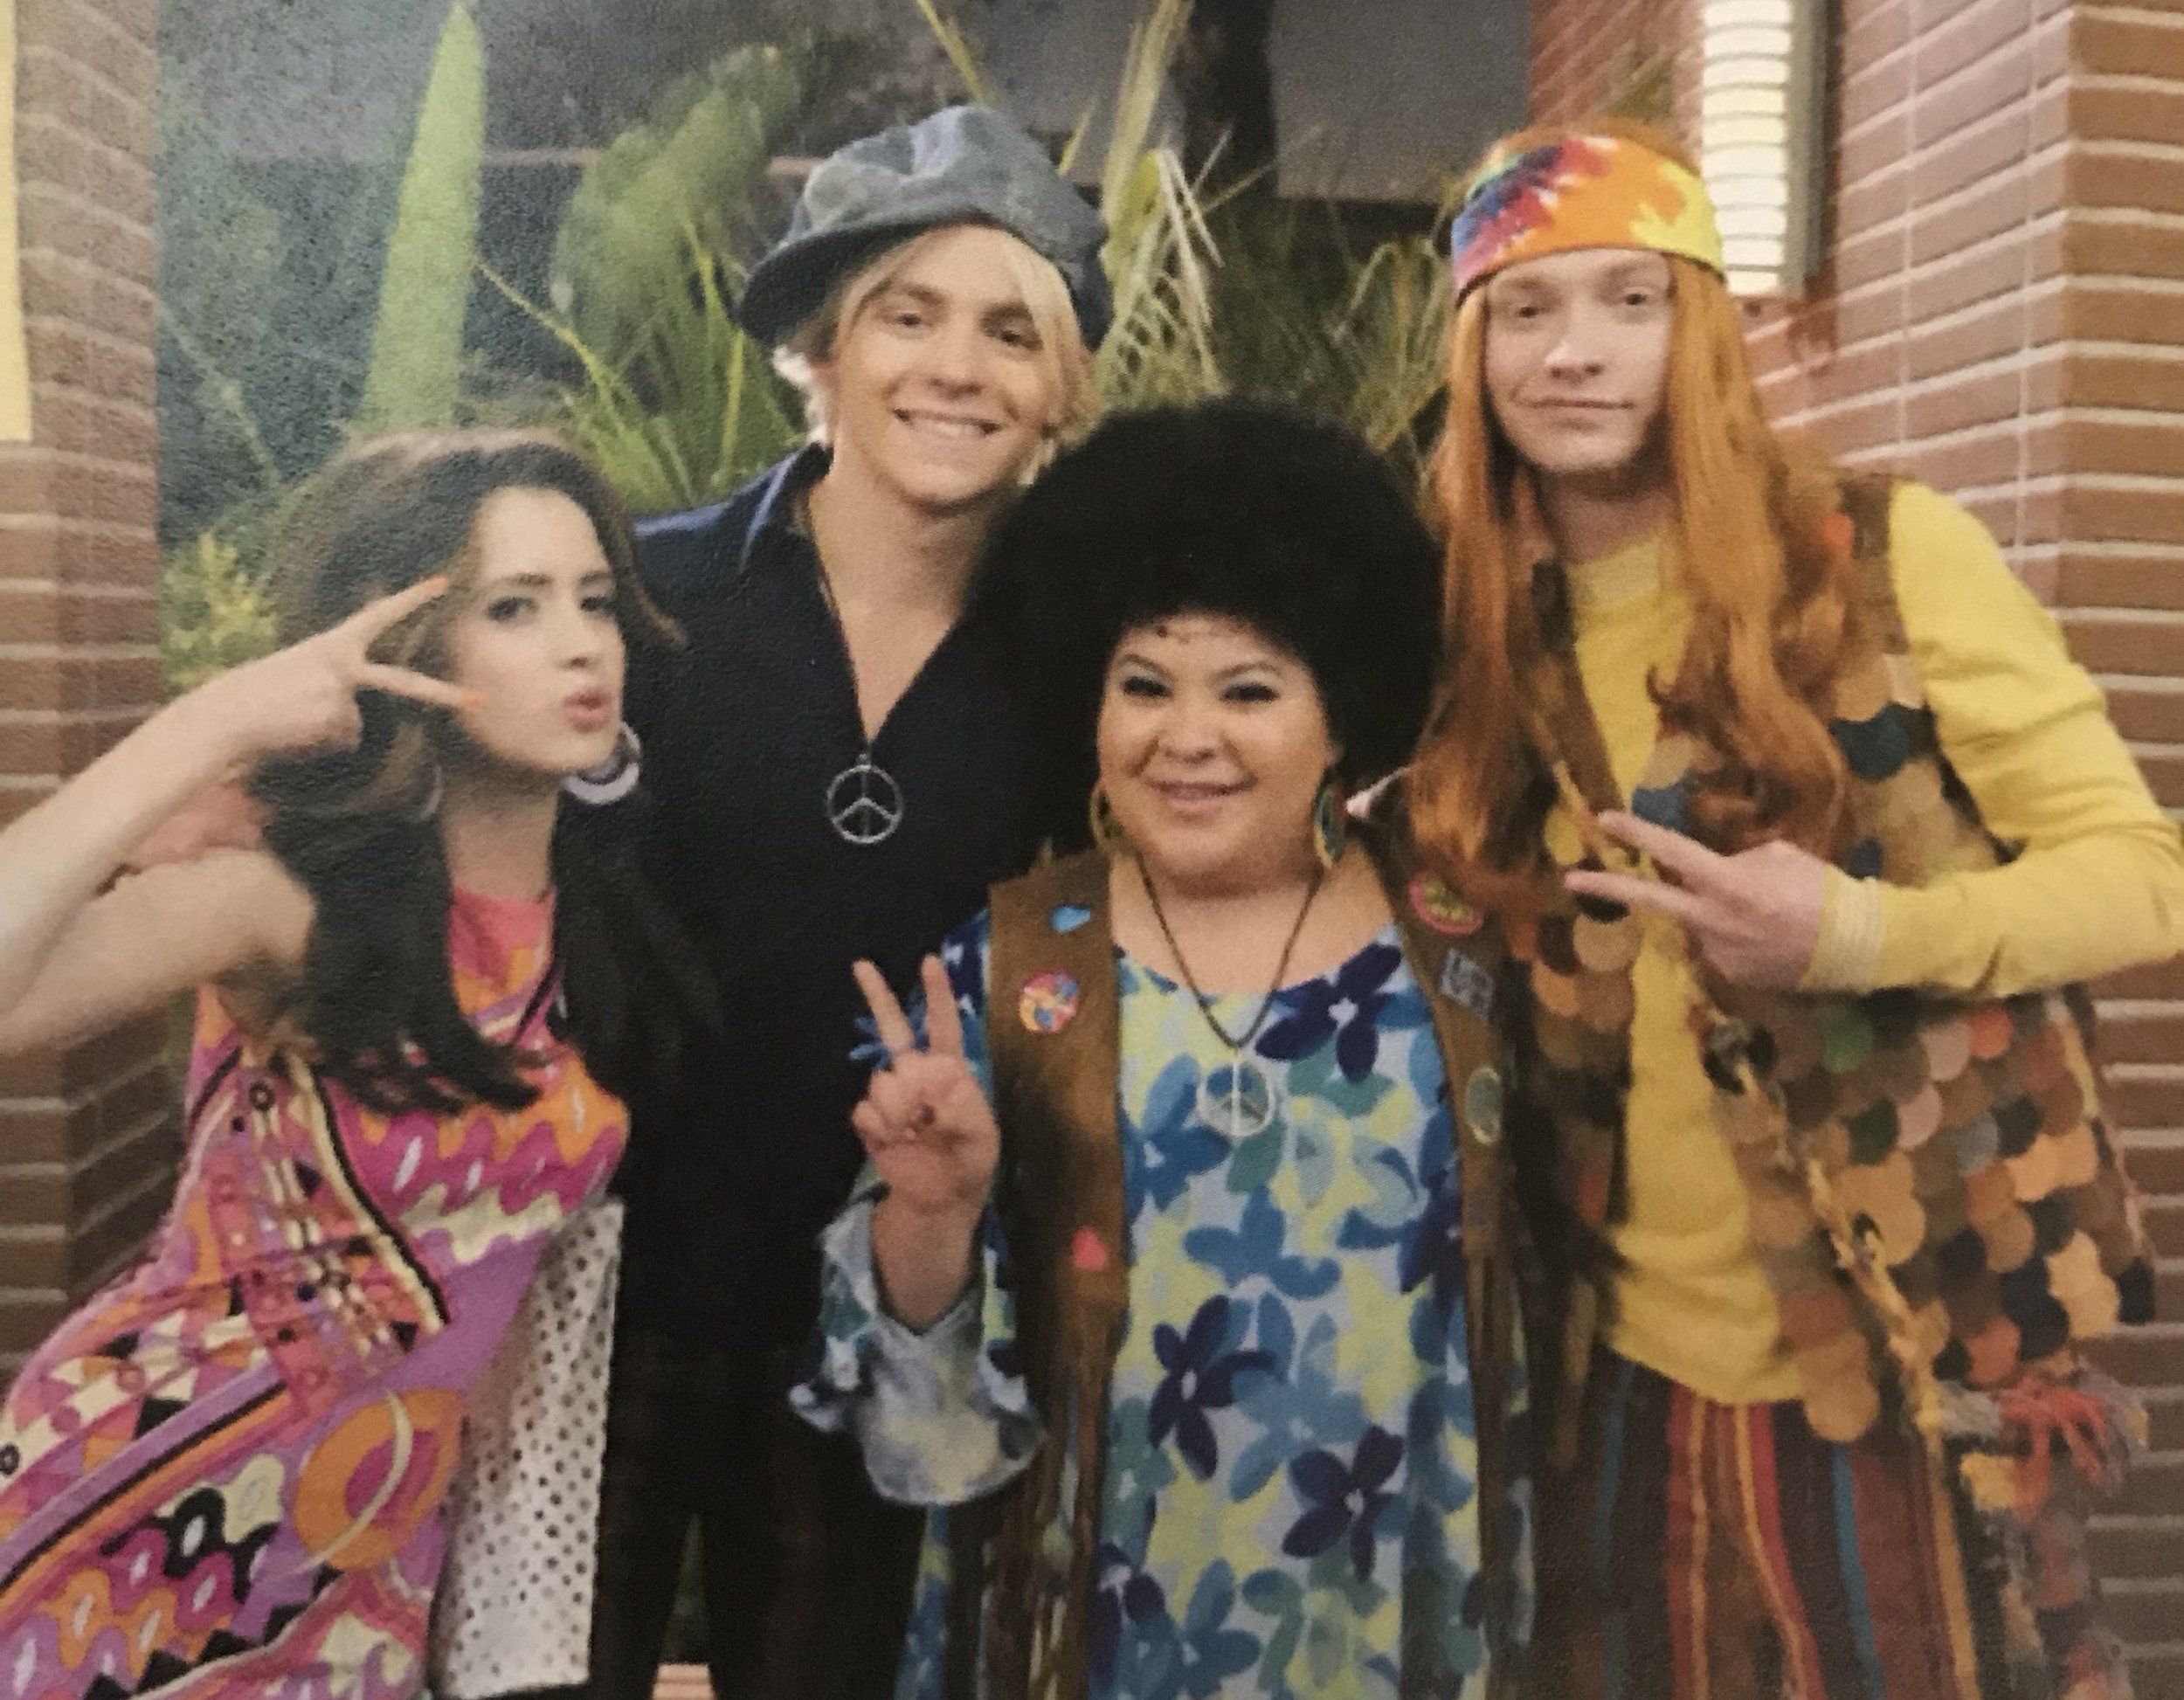 Austin and ally costume